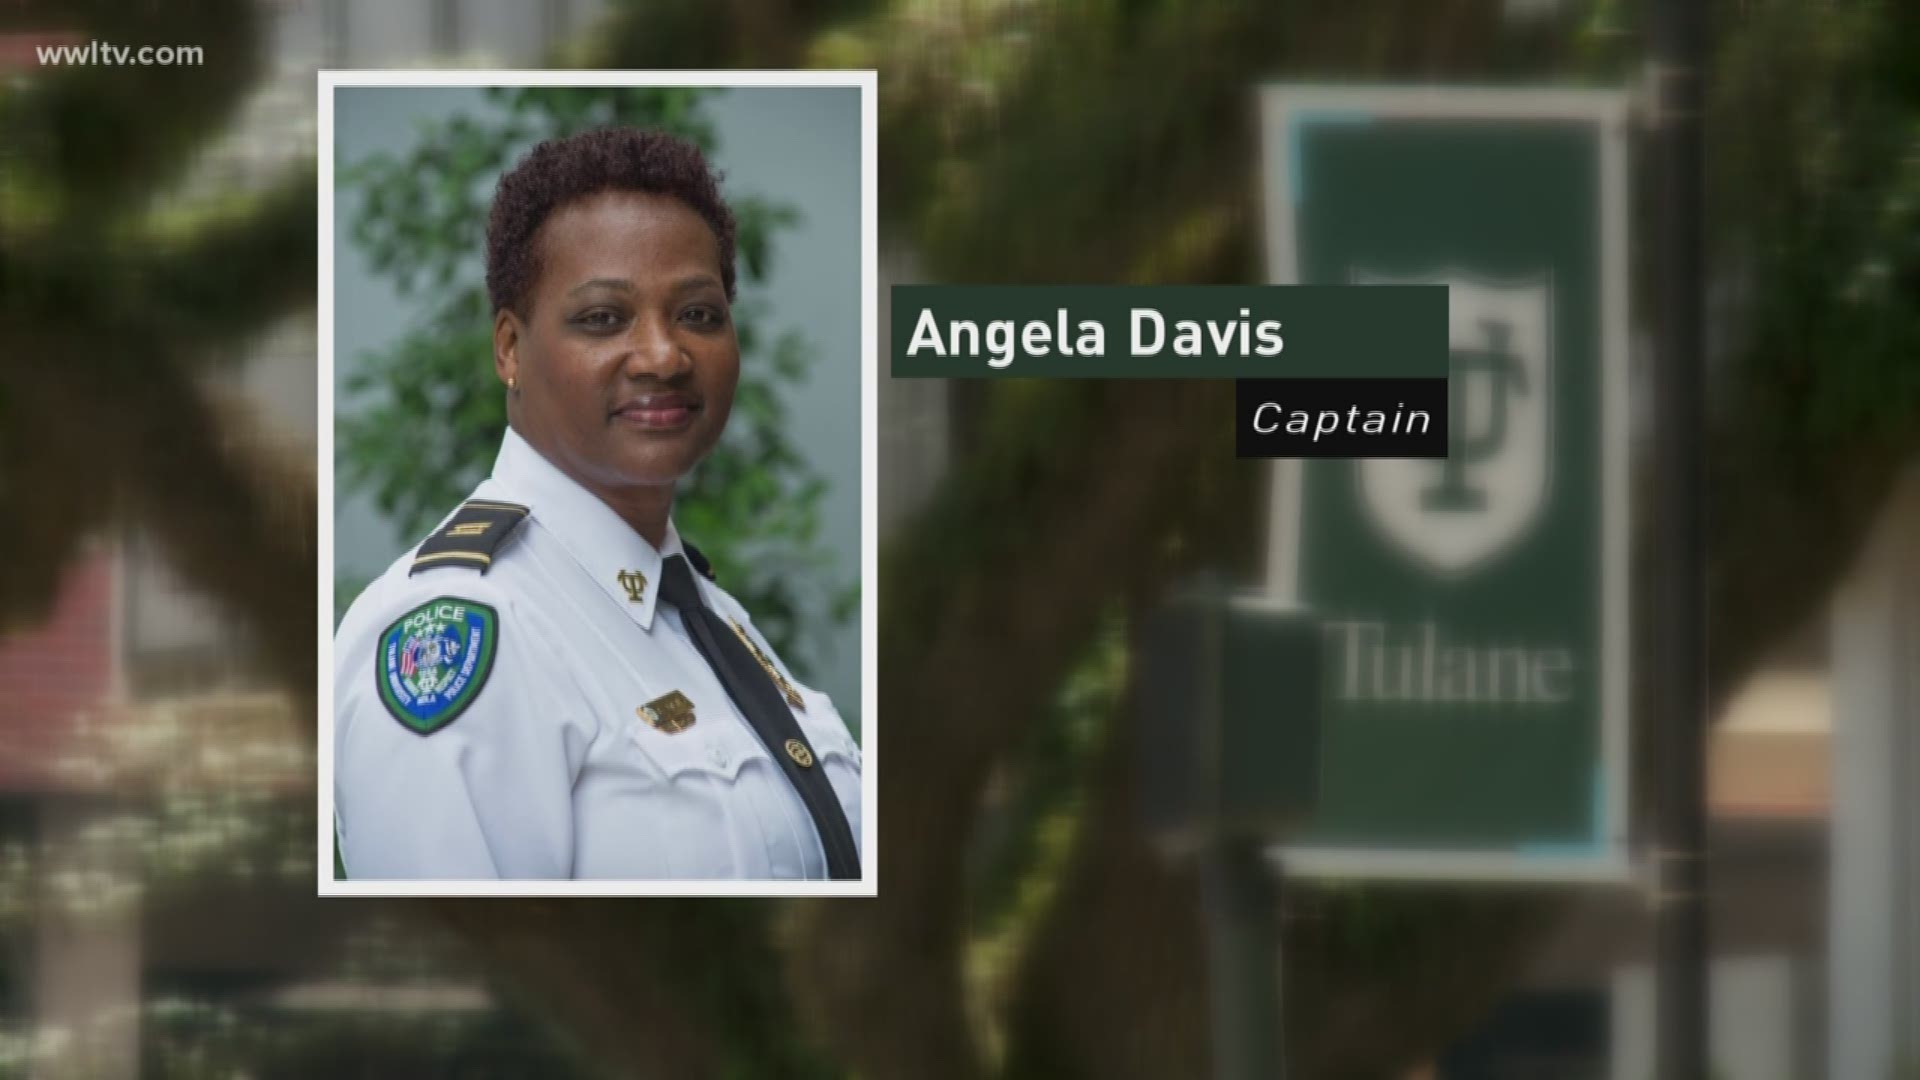 Asked why Tulane would hire someone with Davis' 21-year record at NOPD, including multiple cases of fighting with other officers, Tulane administrators issued a statement saying, "Our hiring process has greatly improved since the time of this hire and now